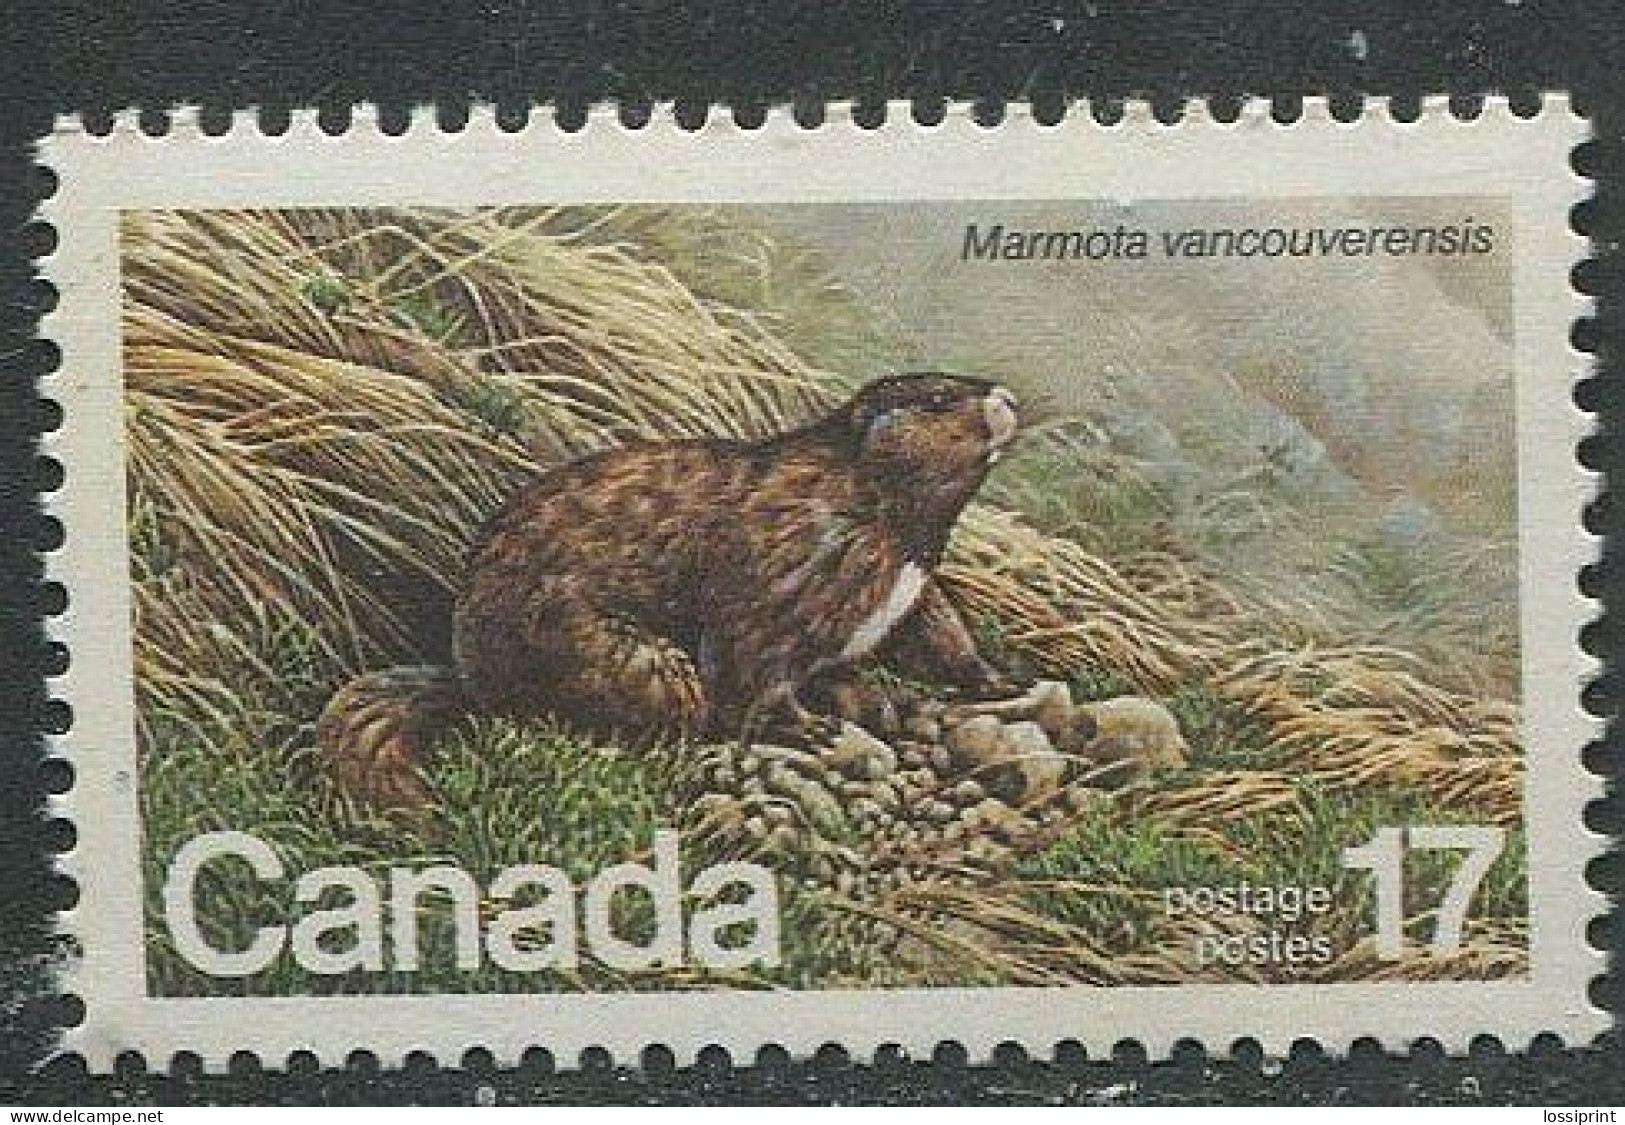 Canada:Unused Stamp Vancouver Island Marmot, 1981, MNH - Rongeurs